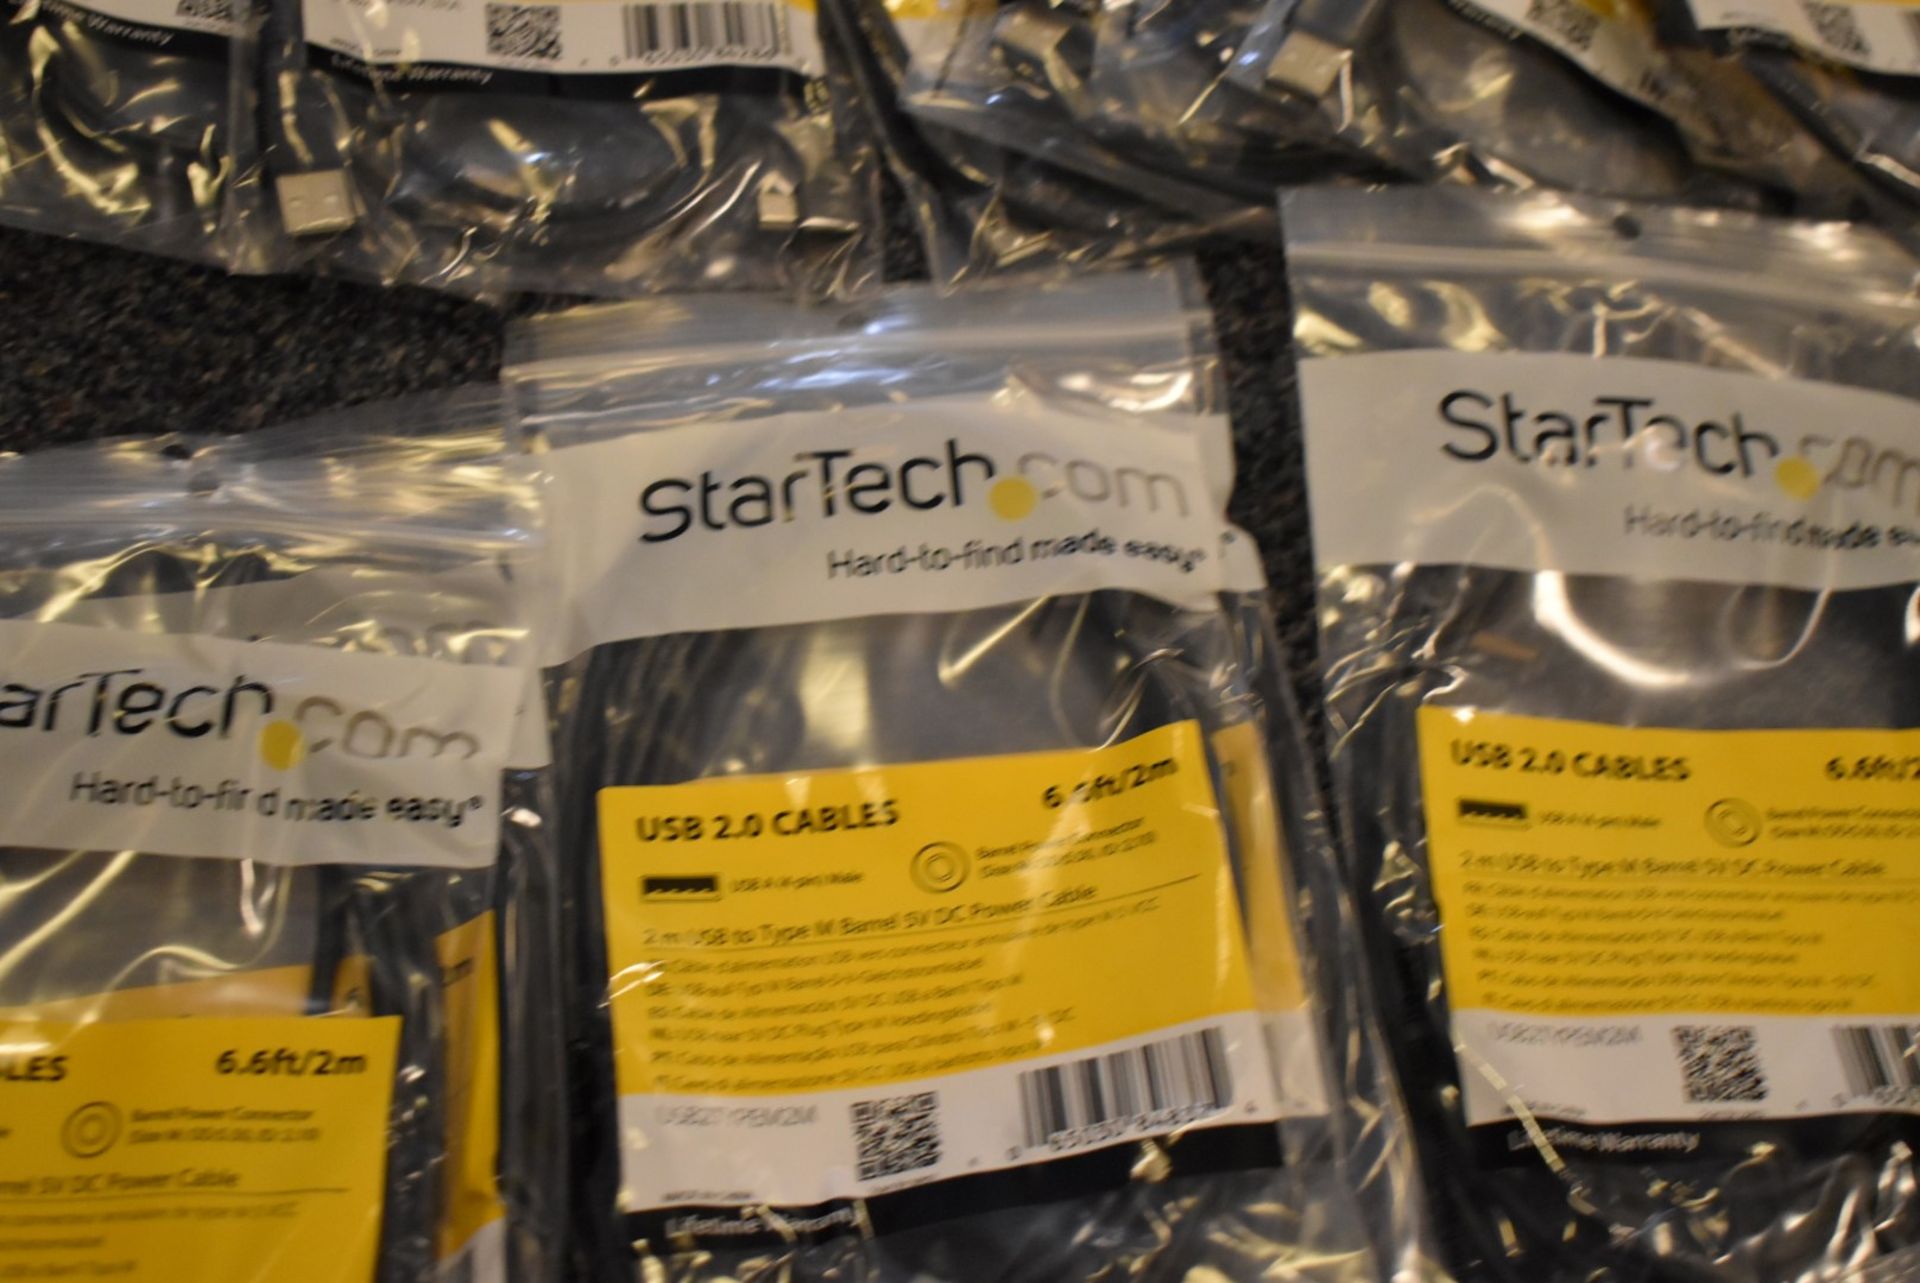 177 x Assorted StarTech Cables - Huge Lot in Original Packing - Various Cables Included - Image 49 of 50